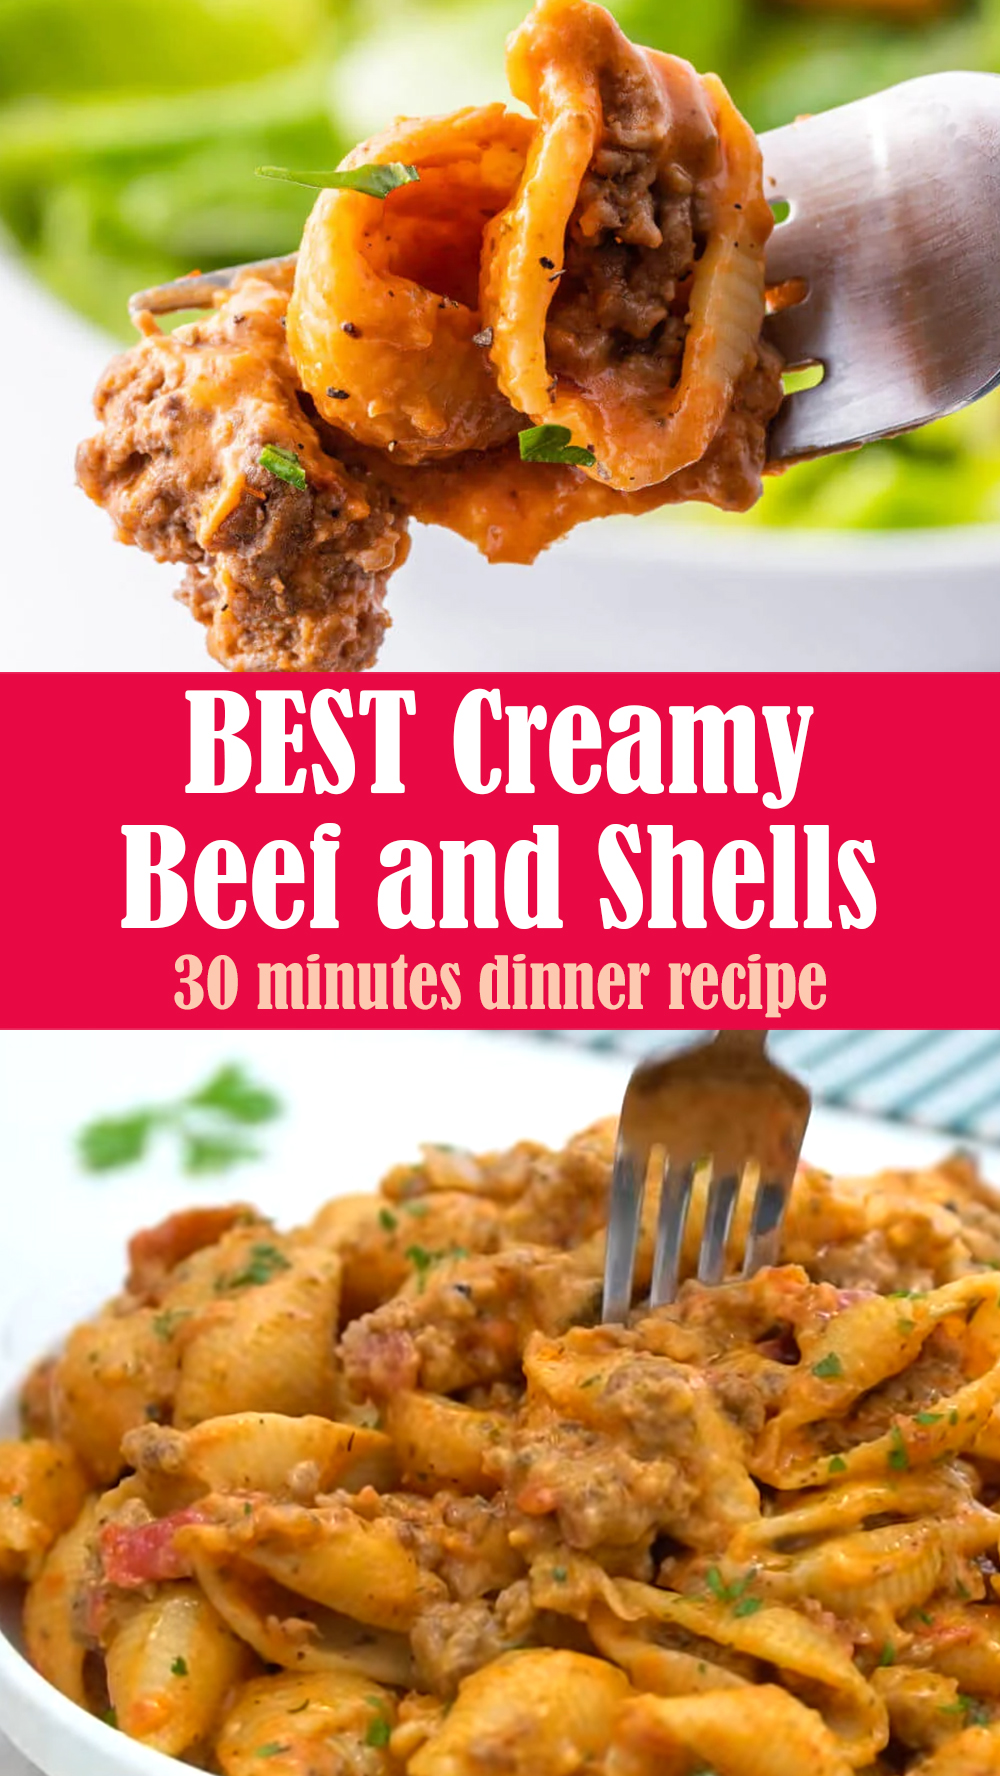 BEST Creamy Beef and Shells